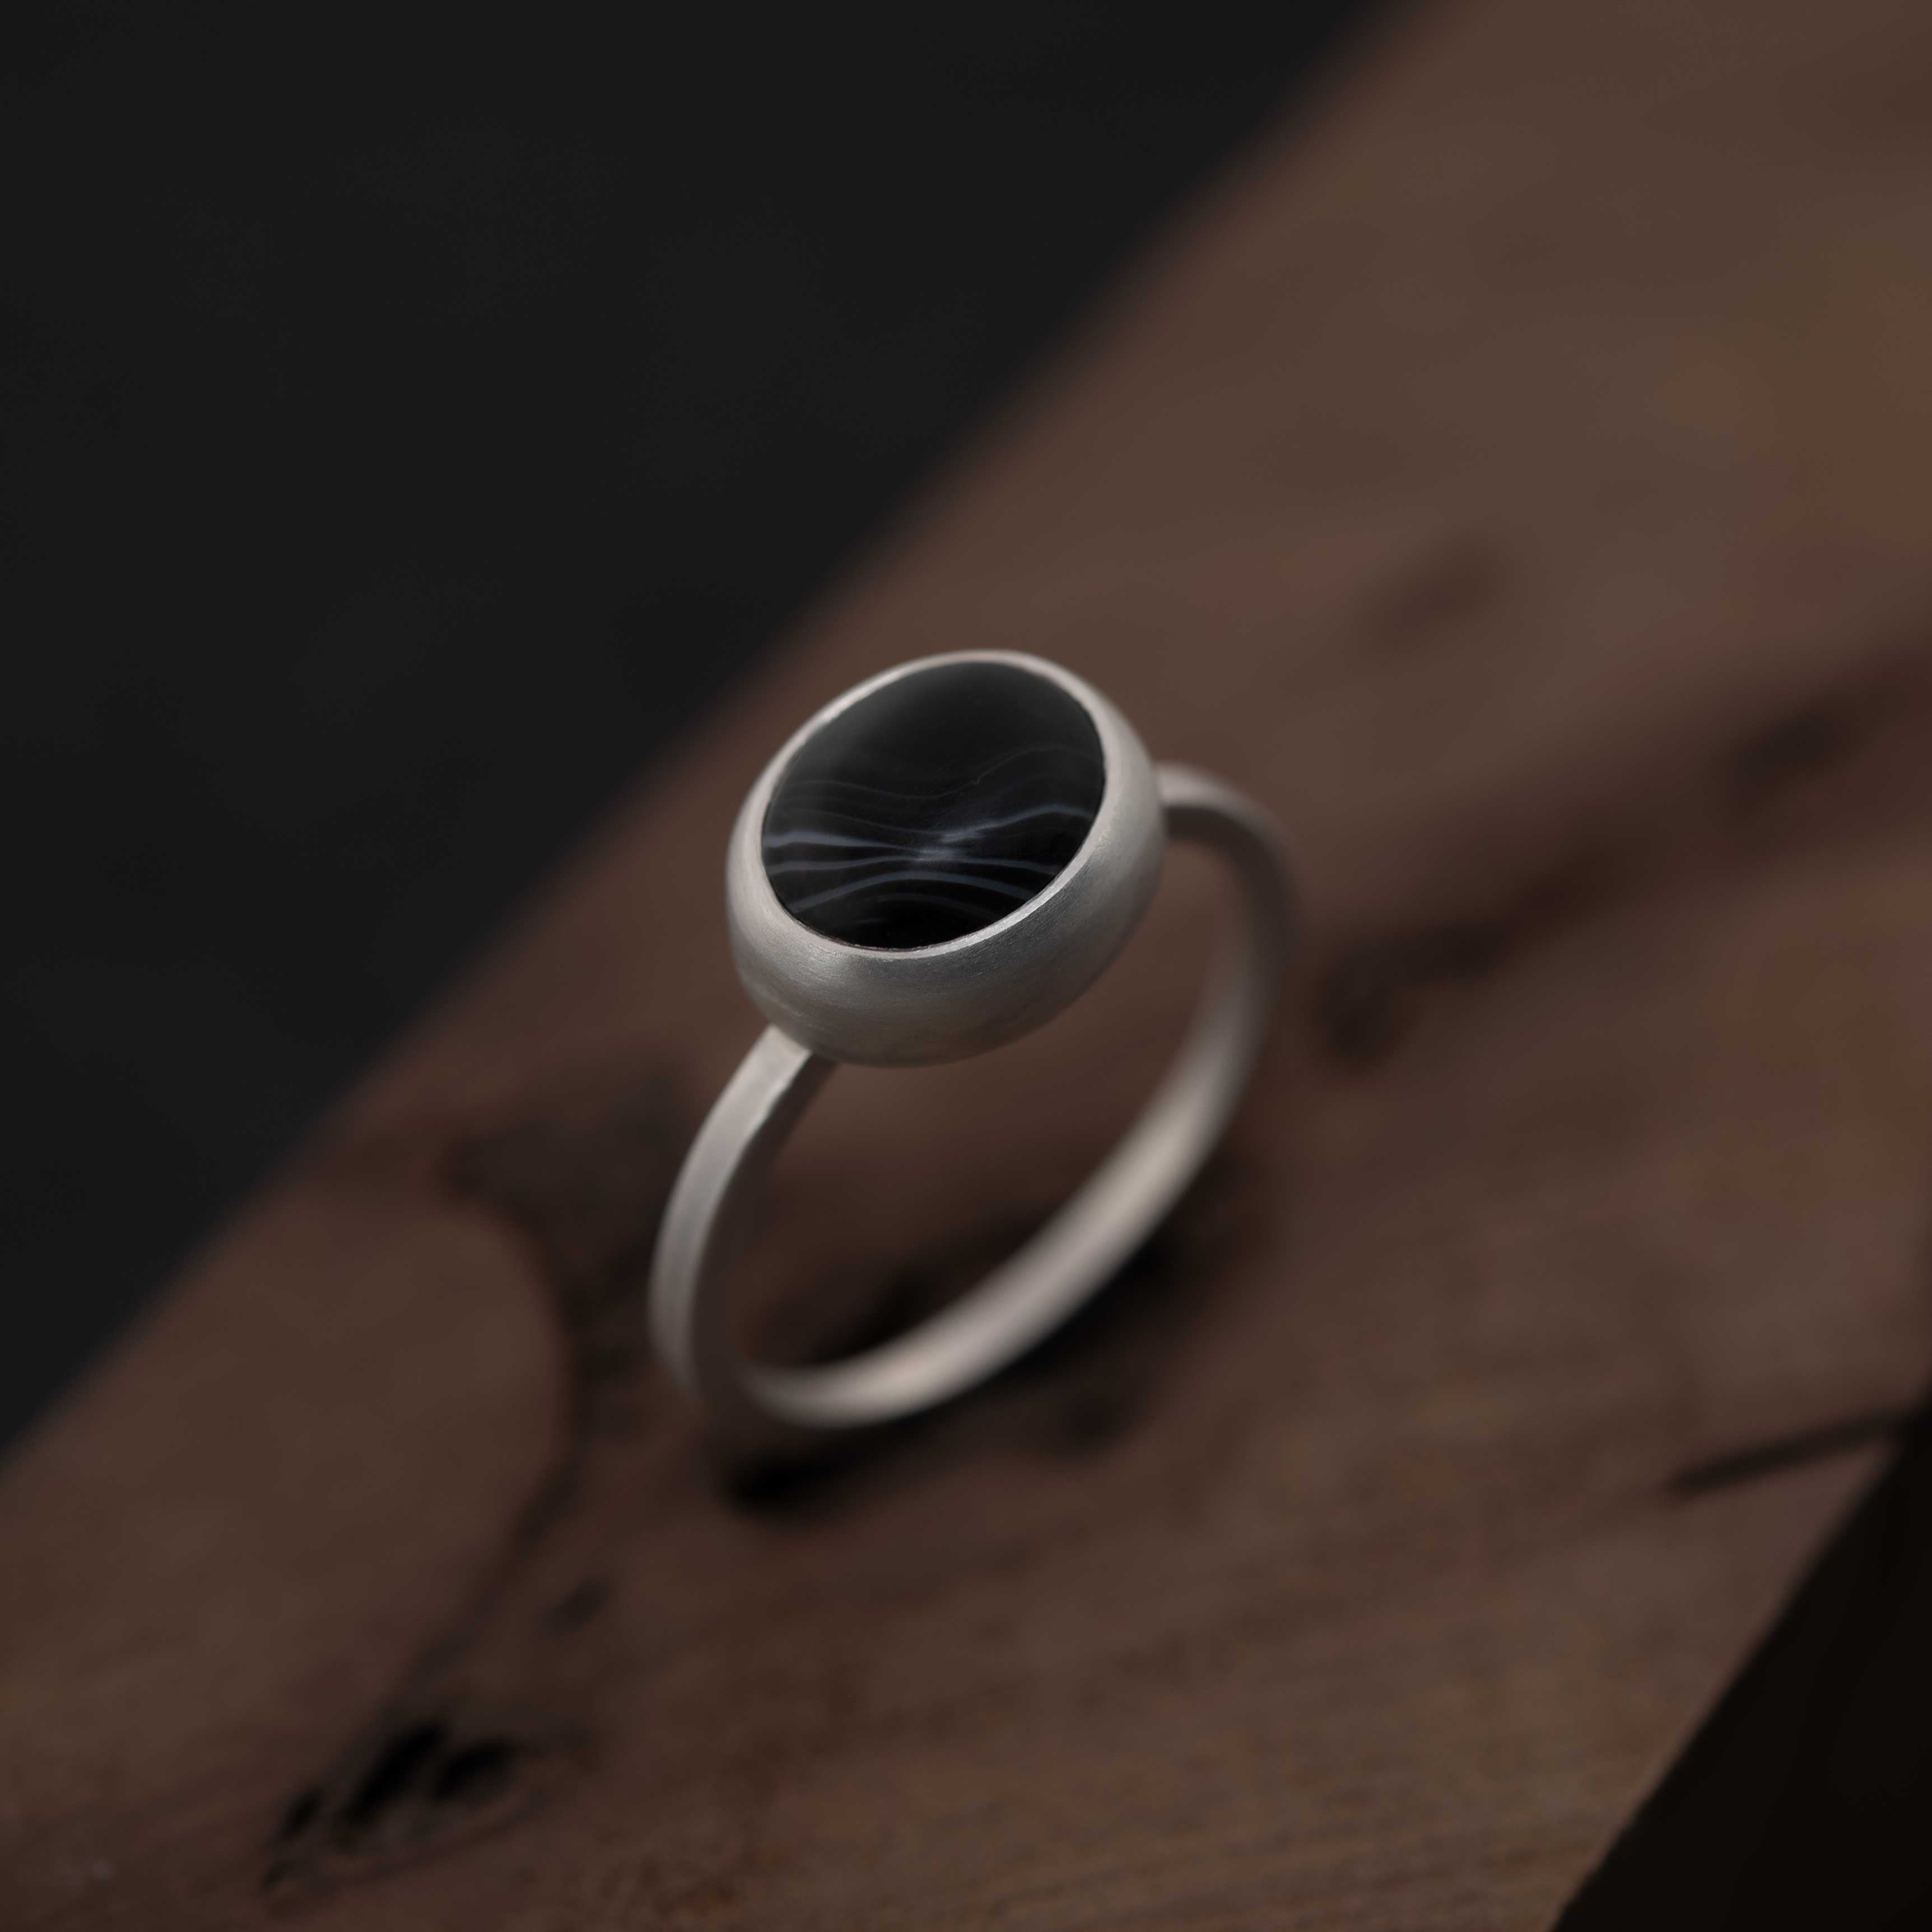 Classic Black Stone Rings for Men and Women Vintage India | Ubuy